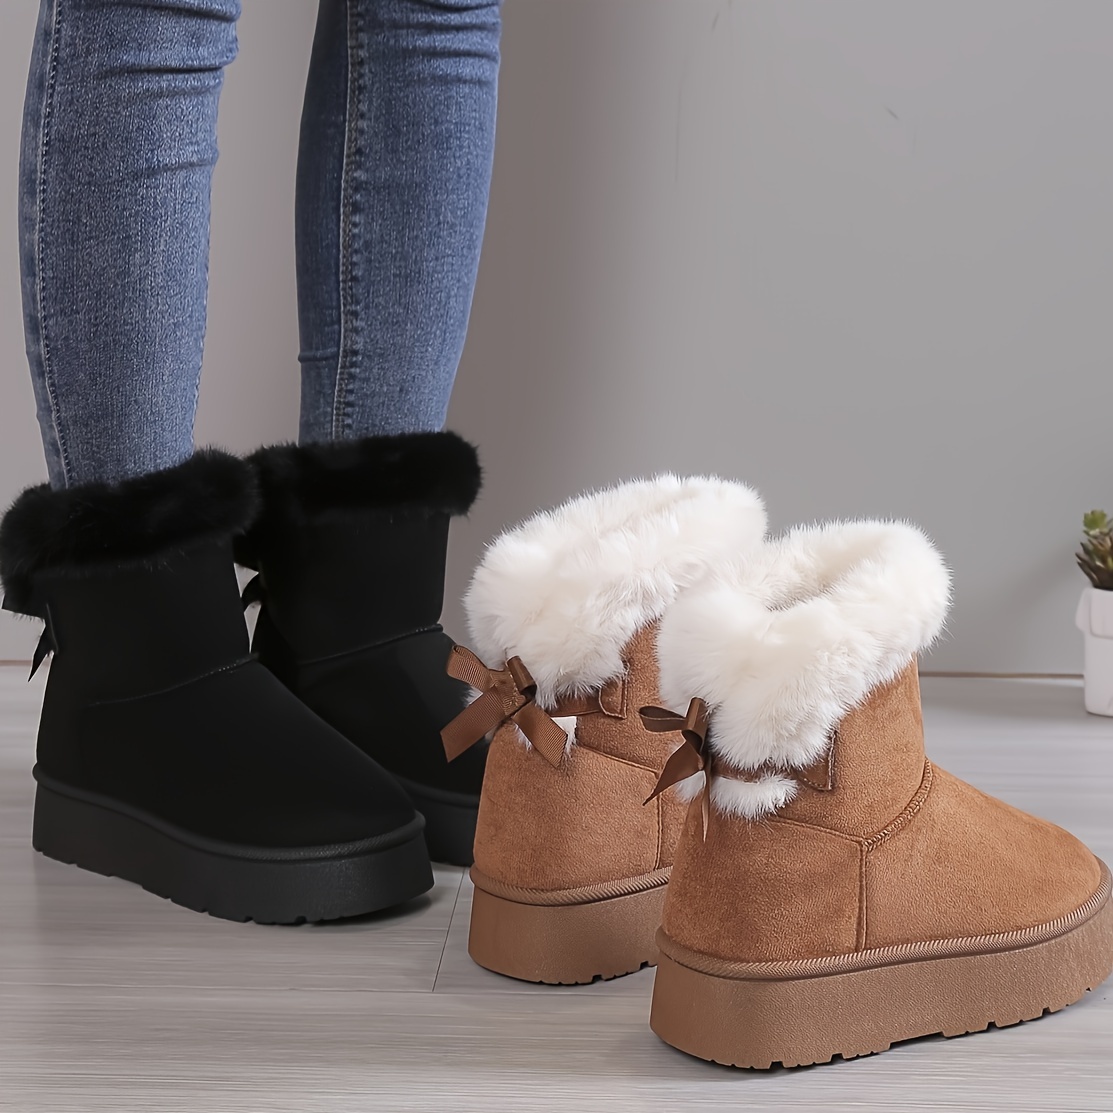 

Women's Solid Color Fluffy Boots, Bowknot Decor Platform Thermal Lined Boots, Winter Non-slip Plush Soft Shoes